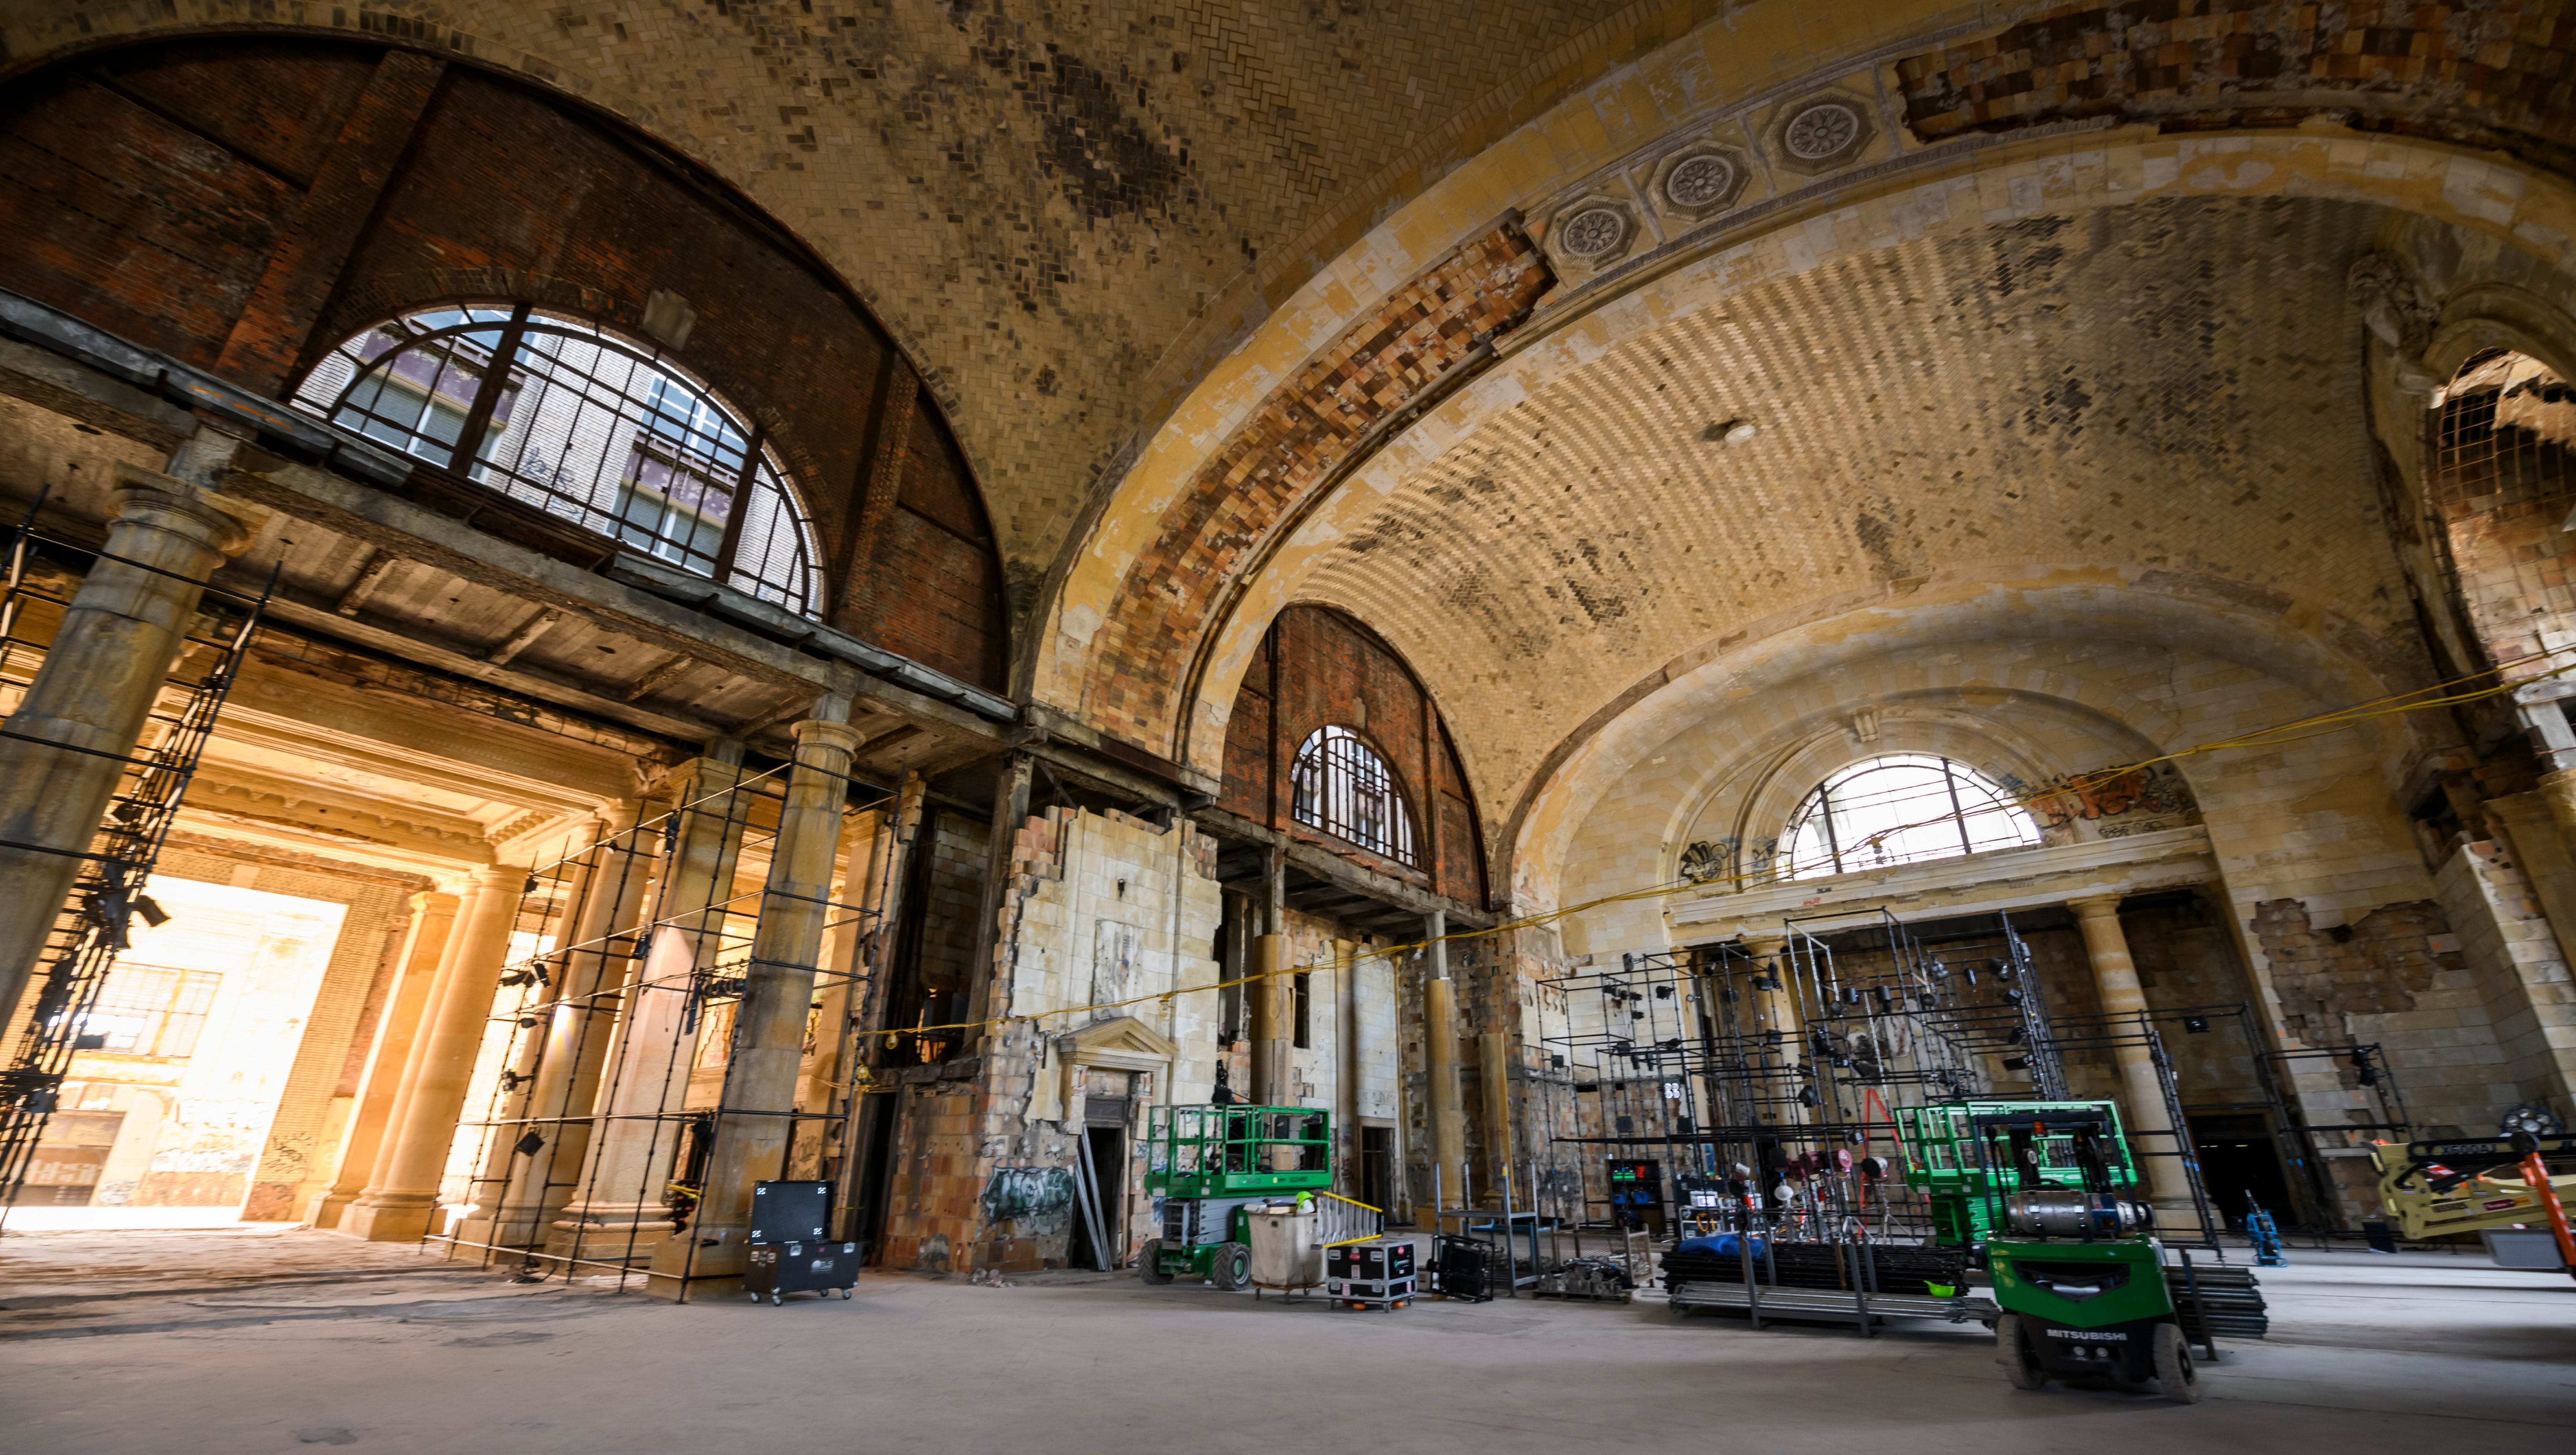 Roughly a third of the renovation cost would be comped by tax breaks for the historic restoration of the depot. Ford, the city, and the former owners of the building have declined comment on the purchase price or how much Ford will spend on the renovation.